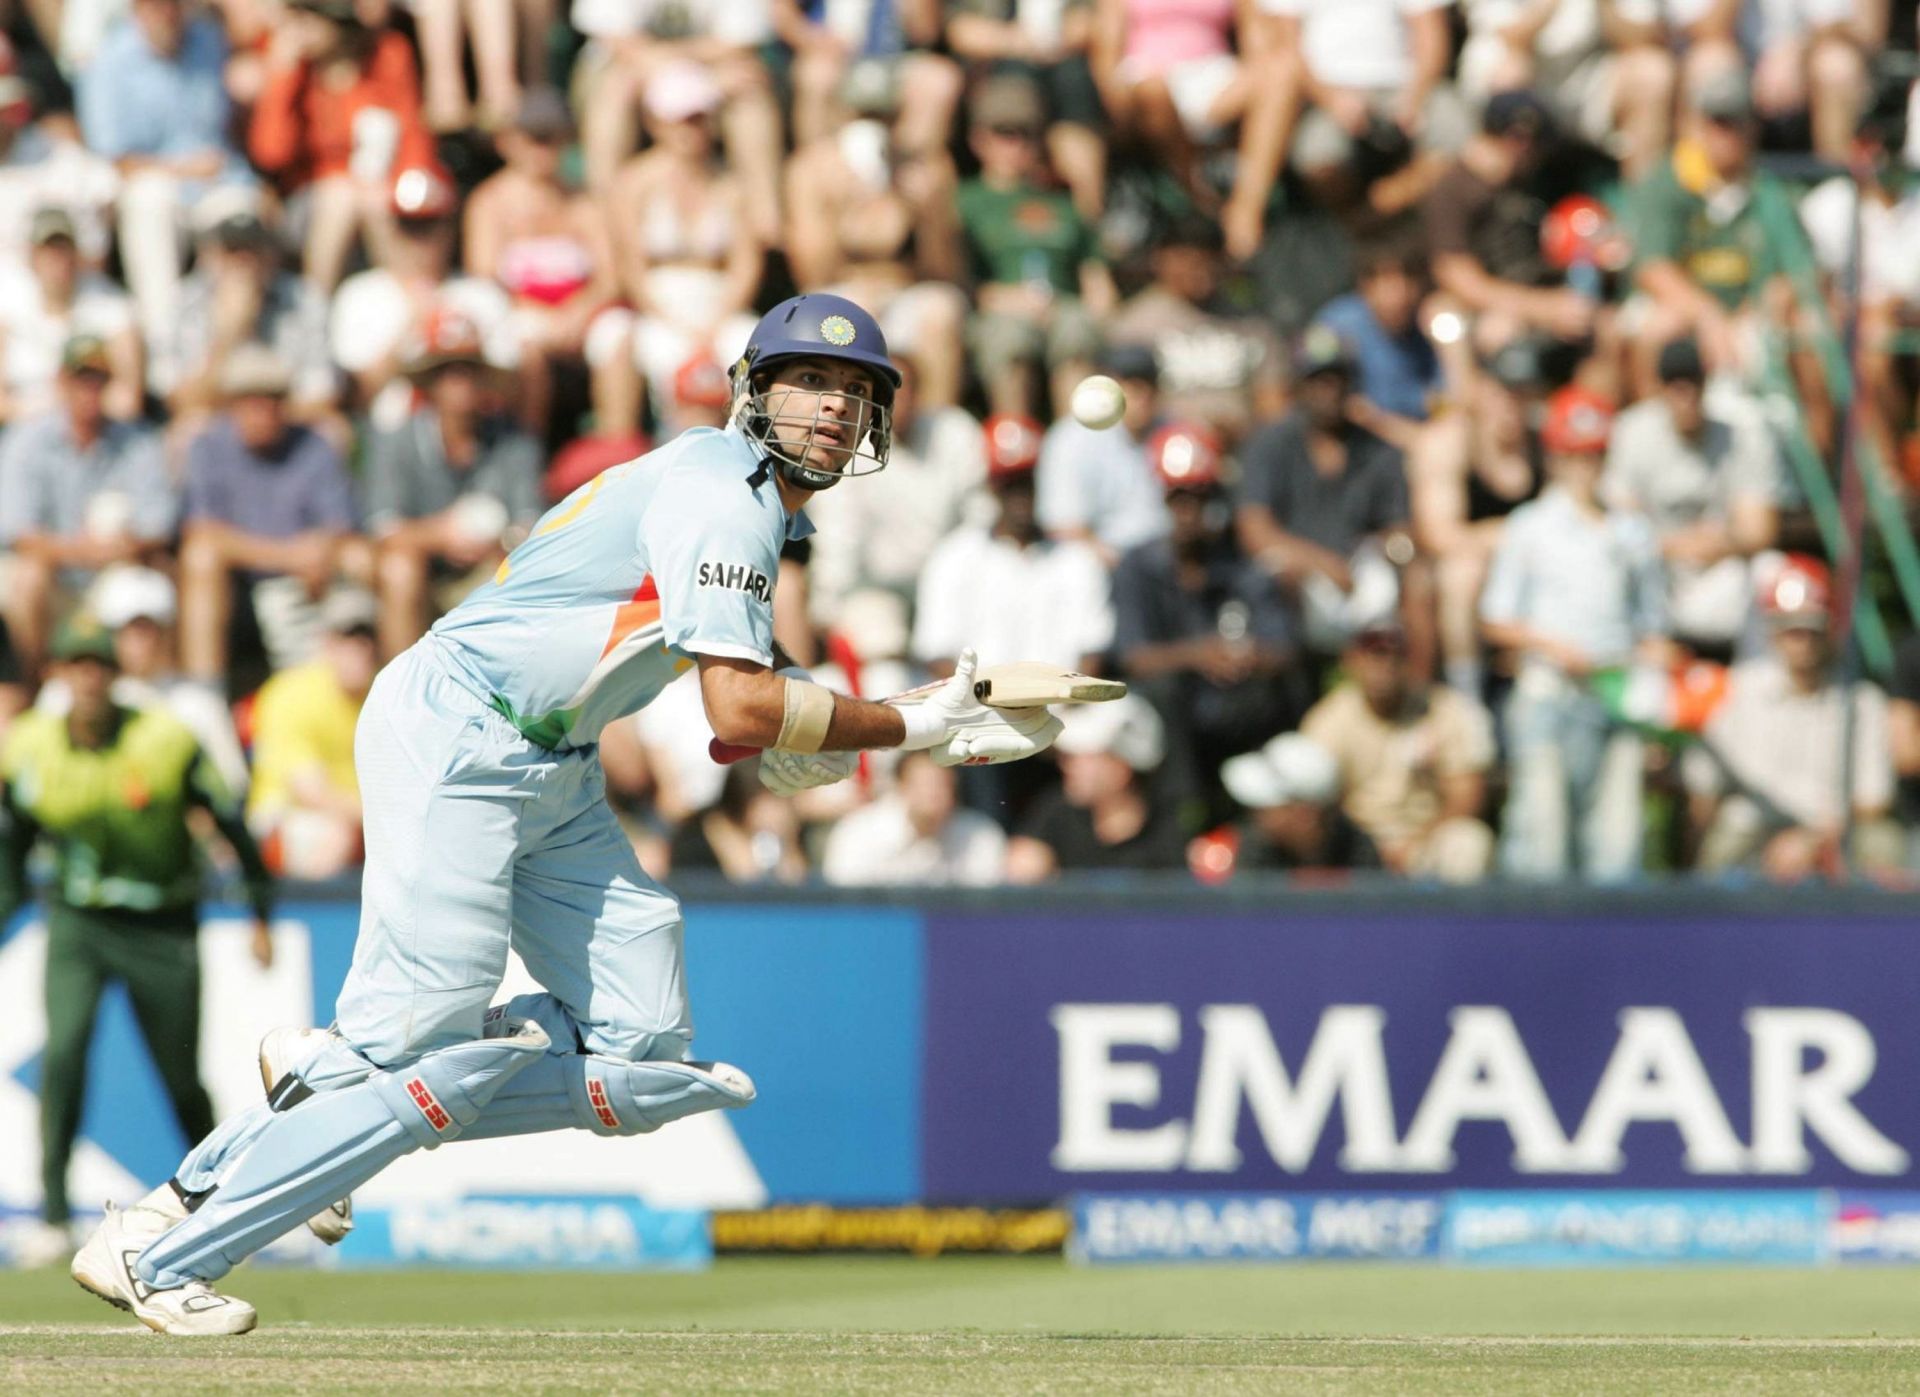 Yuvraj Singh displayed brilliant form in the 2007 T20 World Cup